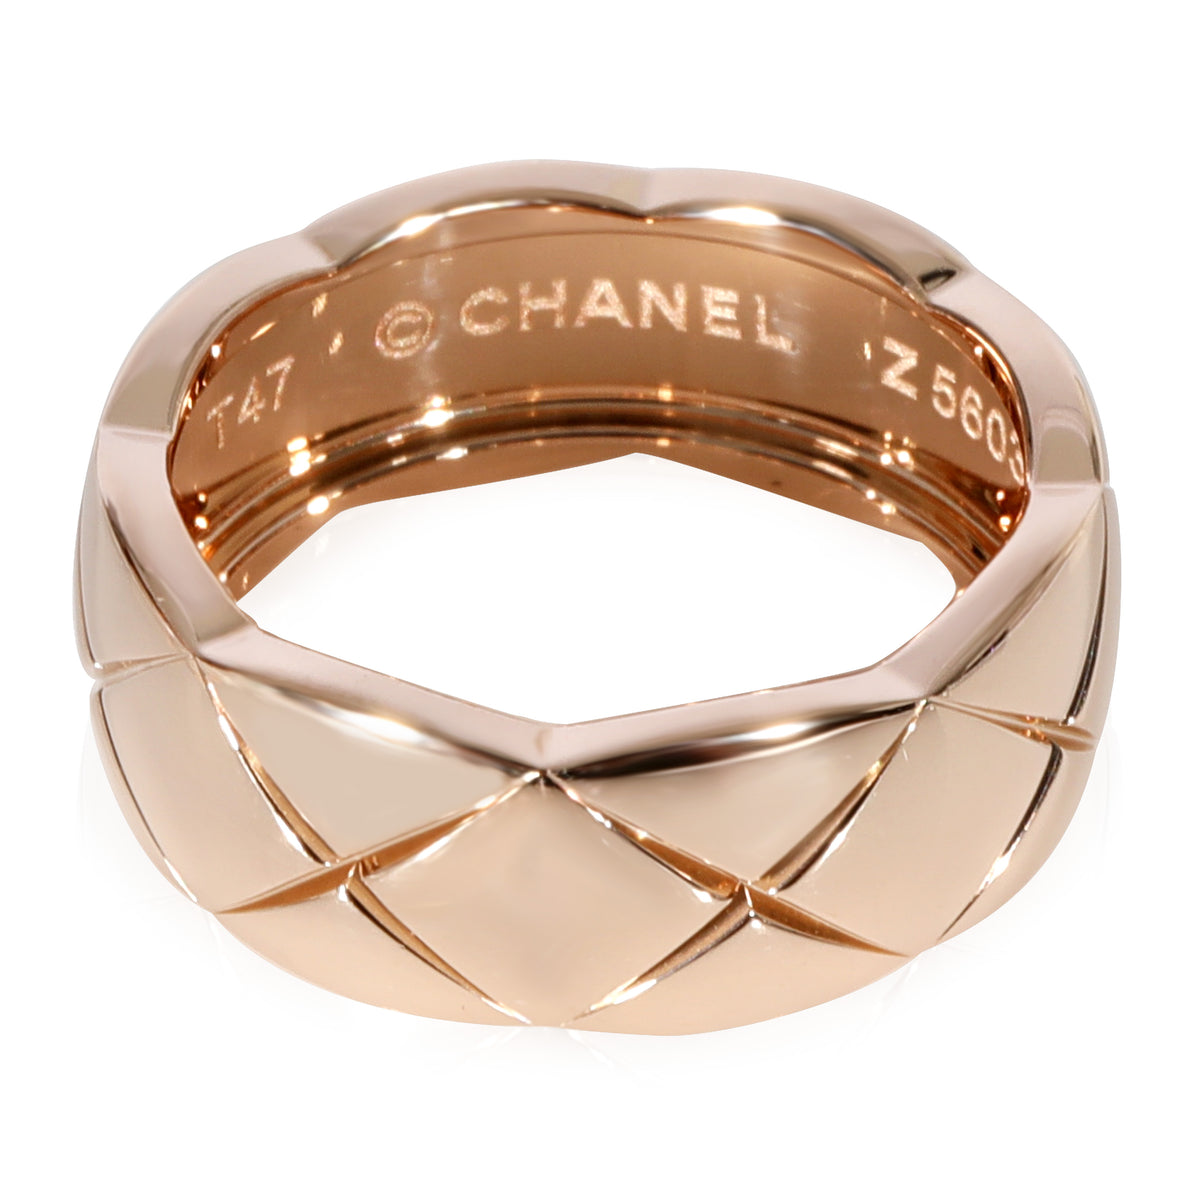 Chanel Coco Crush Ring in 18k Rose Gold, Small Version